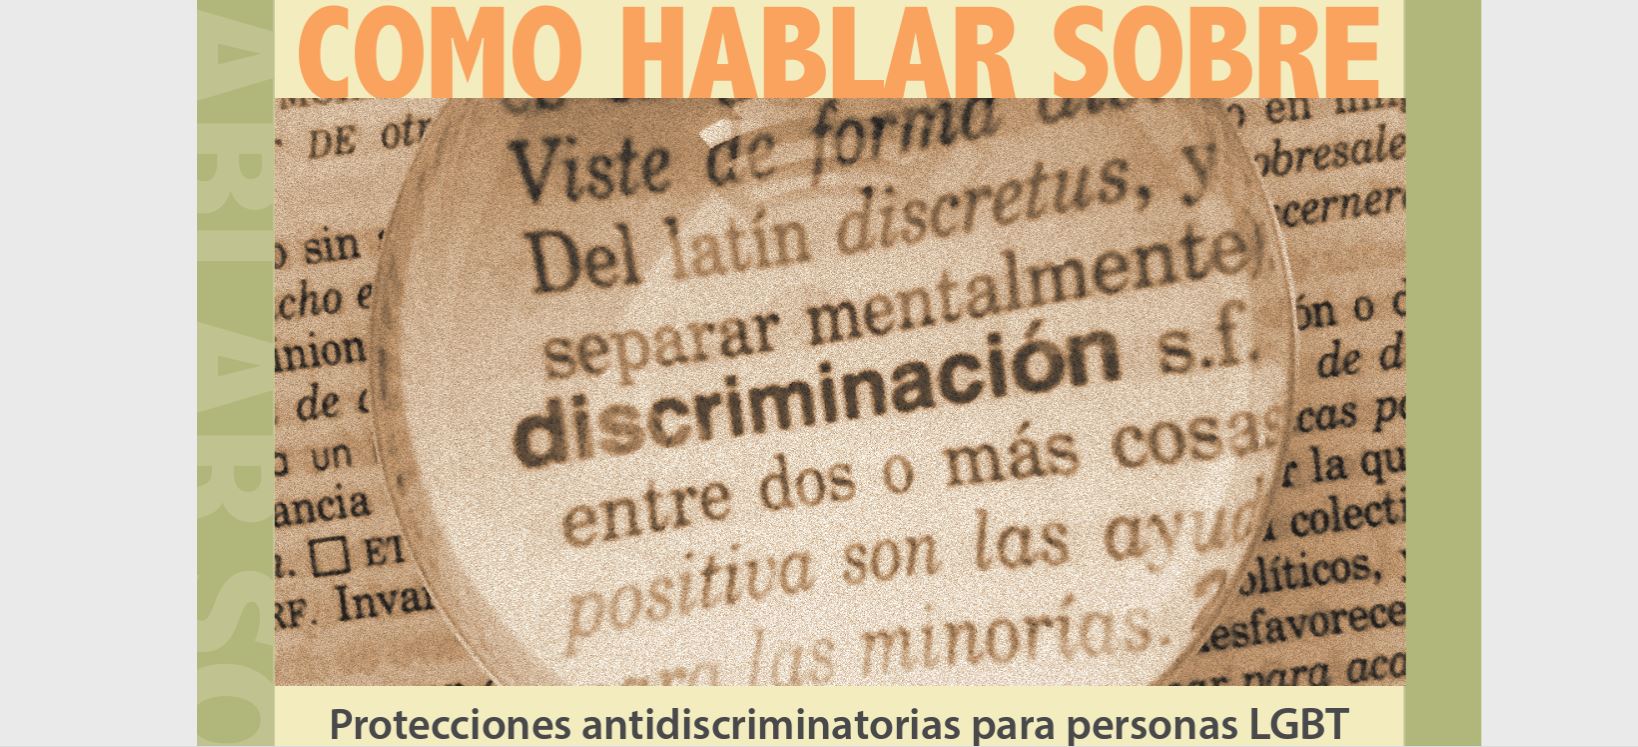 Talking About Nondiscrimination Protections for LGBT People (Spanish)